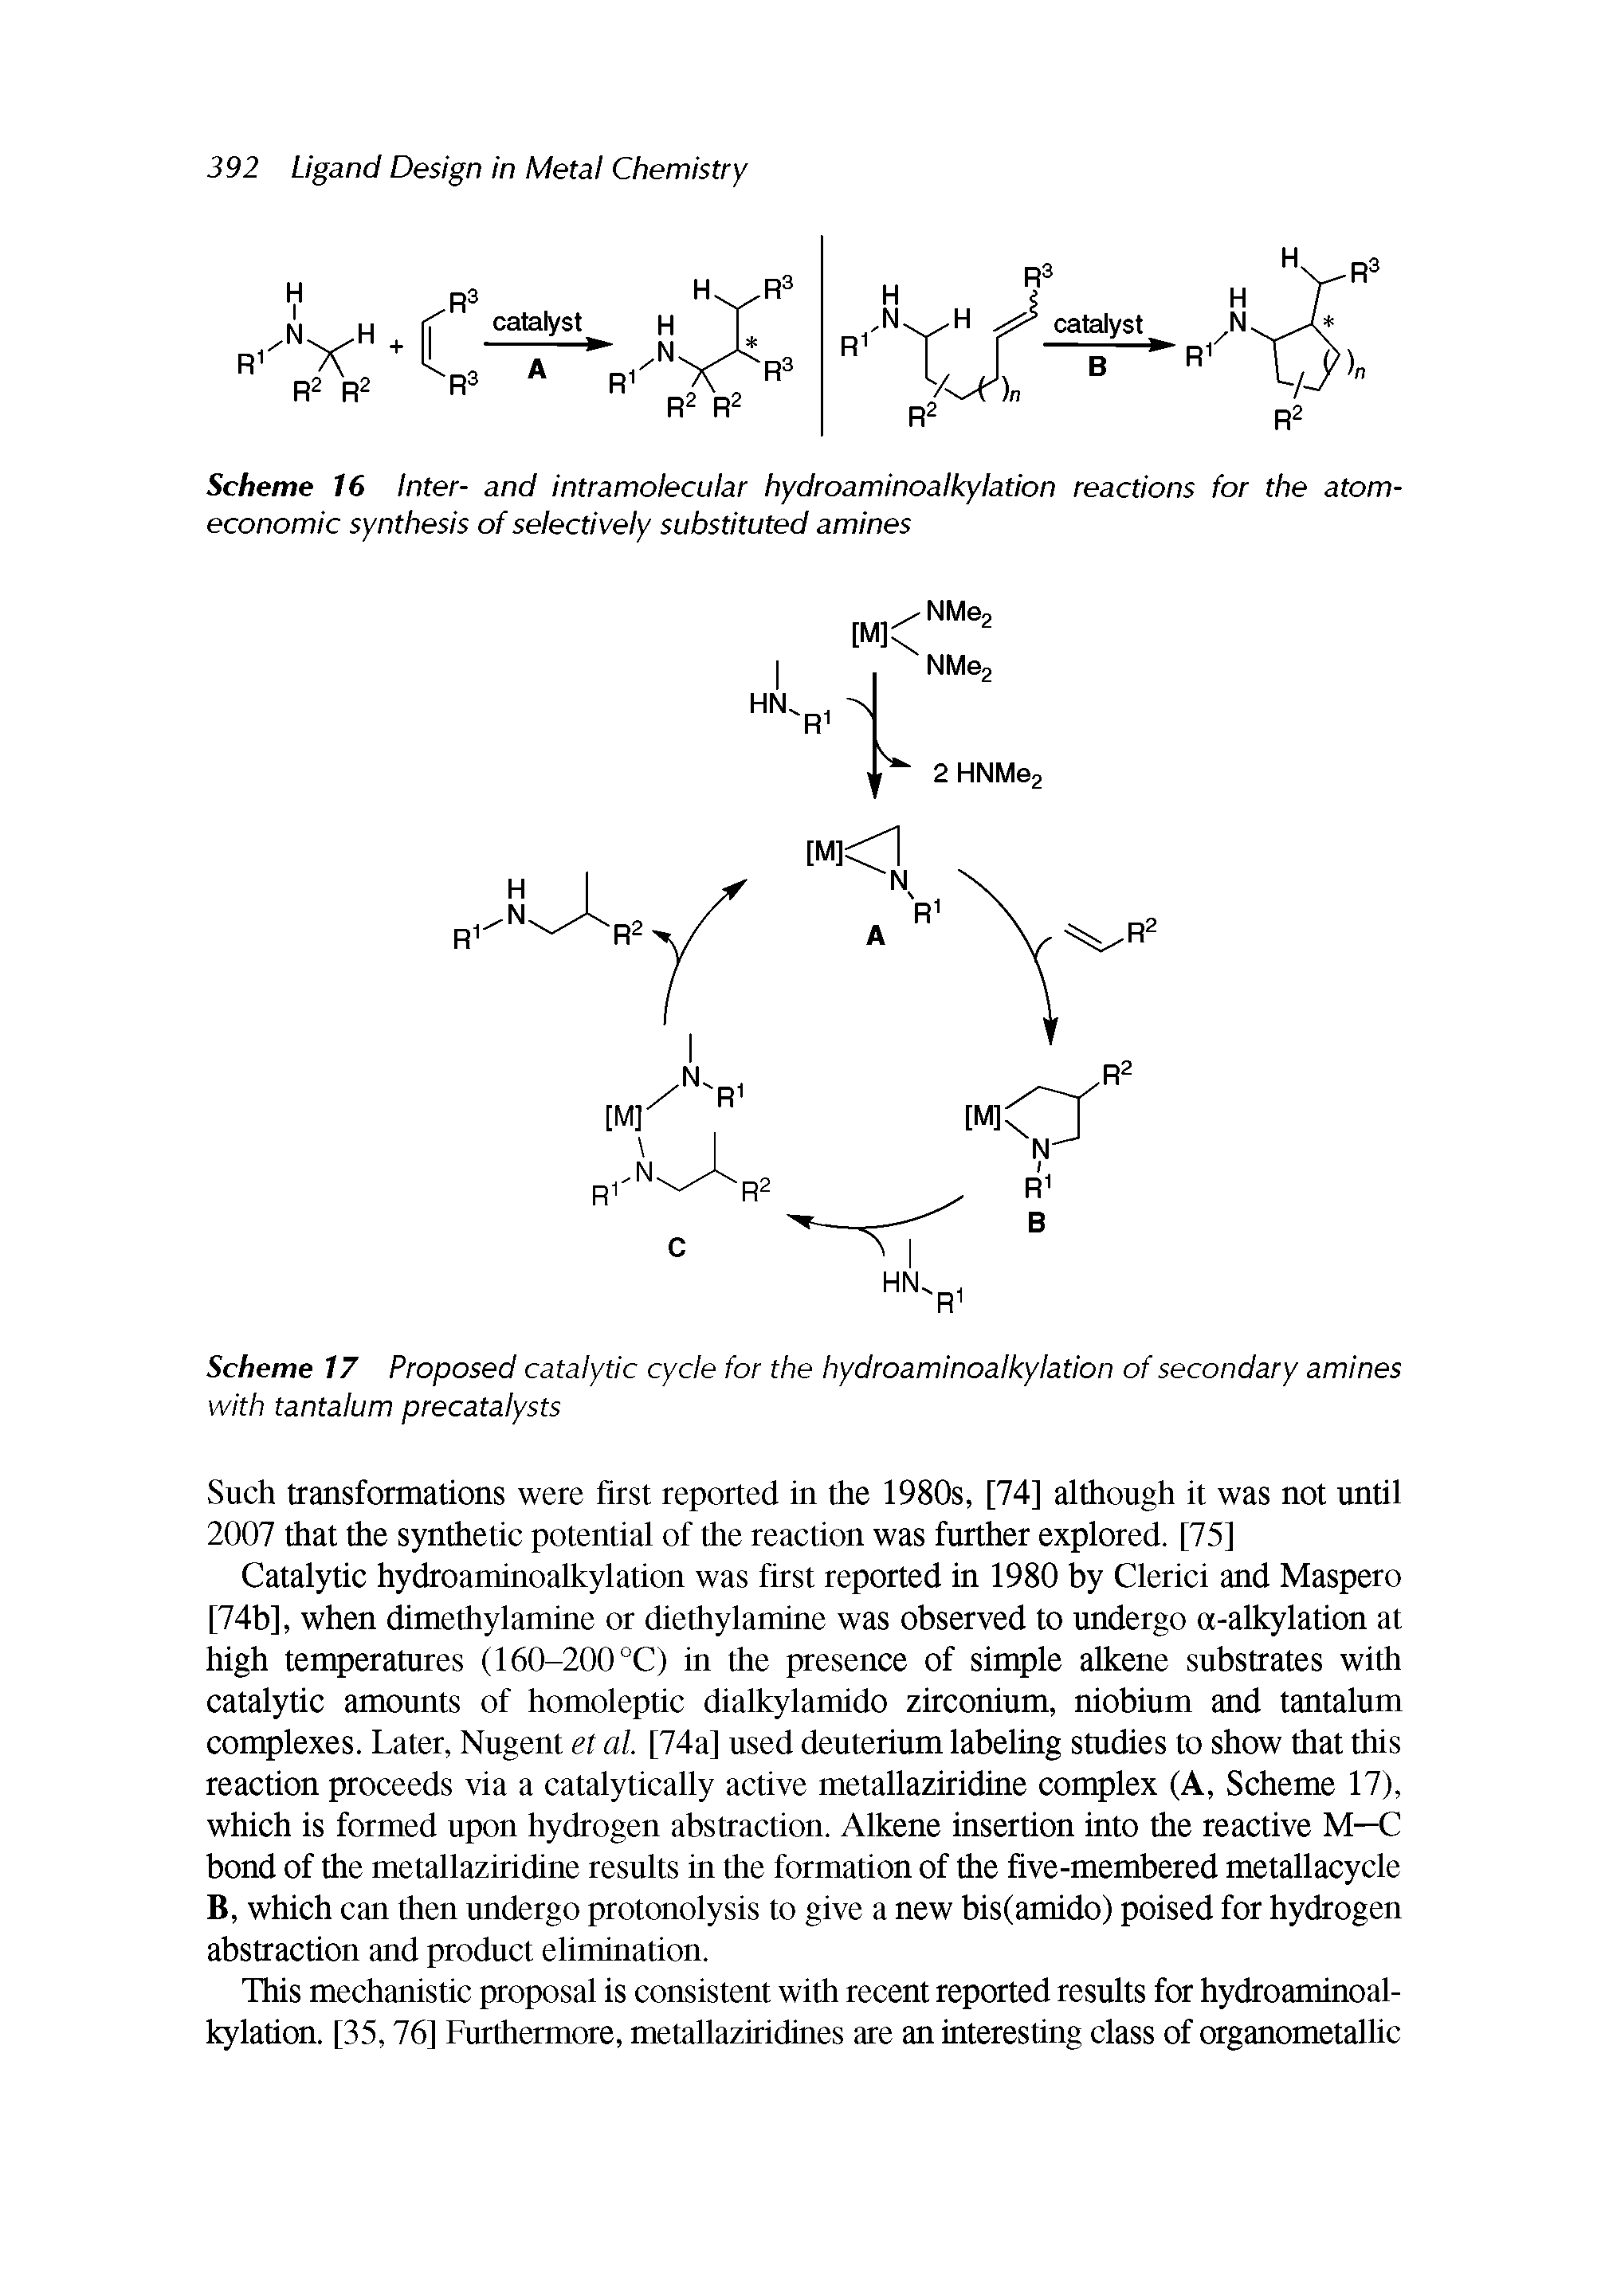 Scheme 16 Inter- and intramolecular hydroaminoalkylation reactions for the atom-economic synthesis of selectively substituted amines...